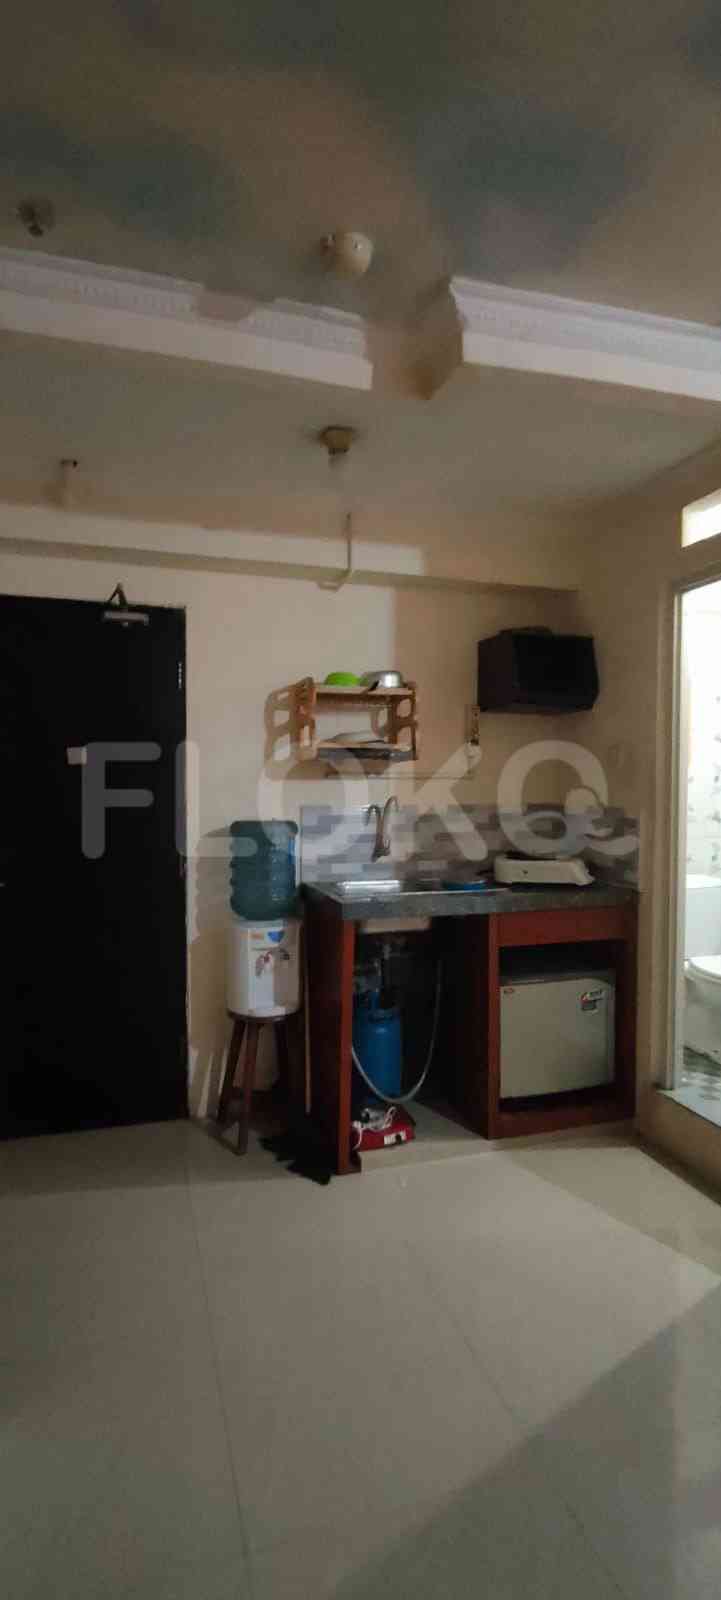 1 Bedroom on 21st Floor for Rent in Sentra Timur Residence - fcab27 7